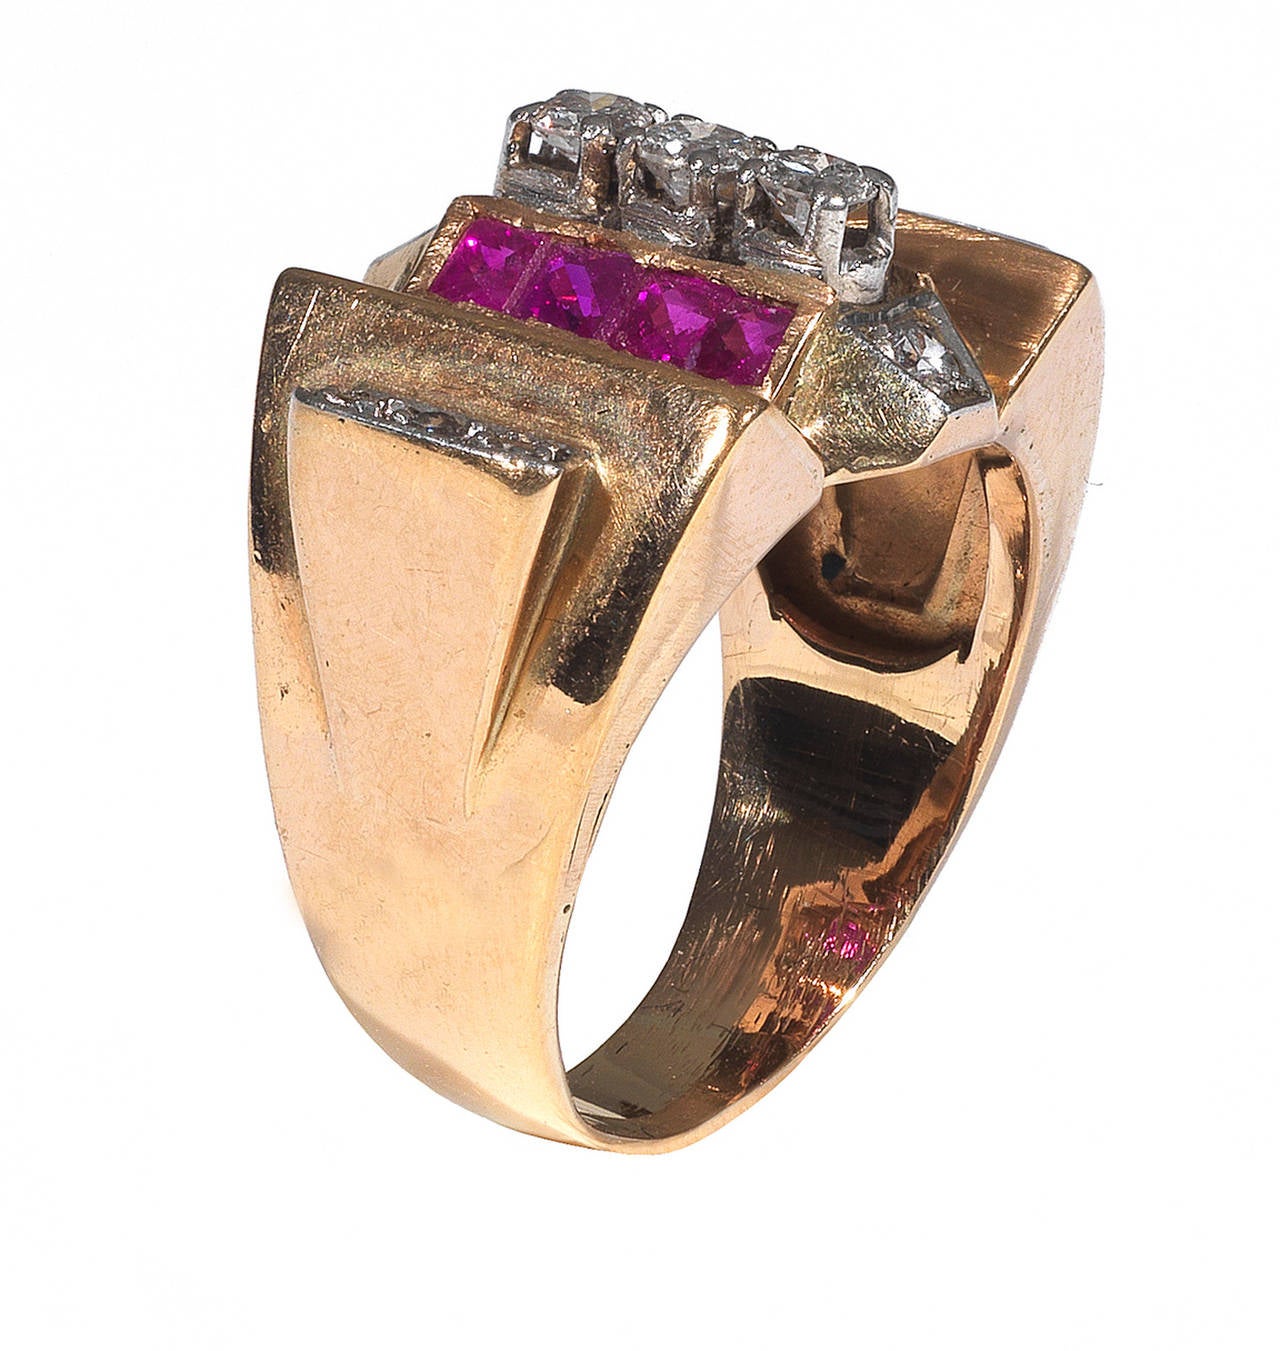 
An unusual retro ring made of three sections, the central one with claw and collet set diamonds and six collet set square cut rubies, the two side sections each with three collet set diamonds.

Mounted in 18Kt rose gold and platinum.

Size: 6